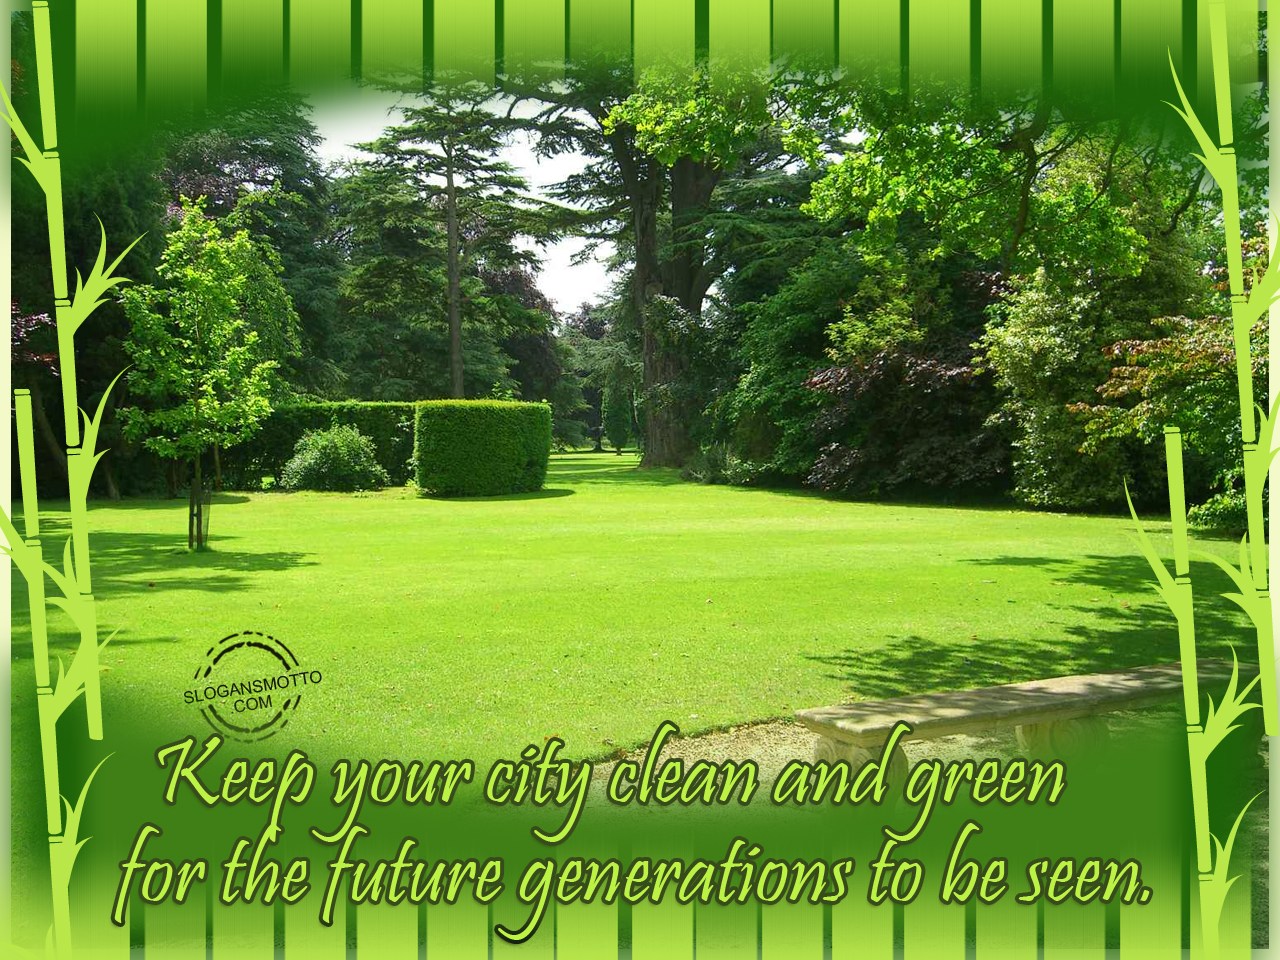 ways to keep our environment clean and green